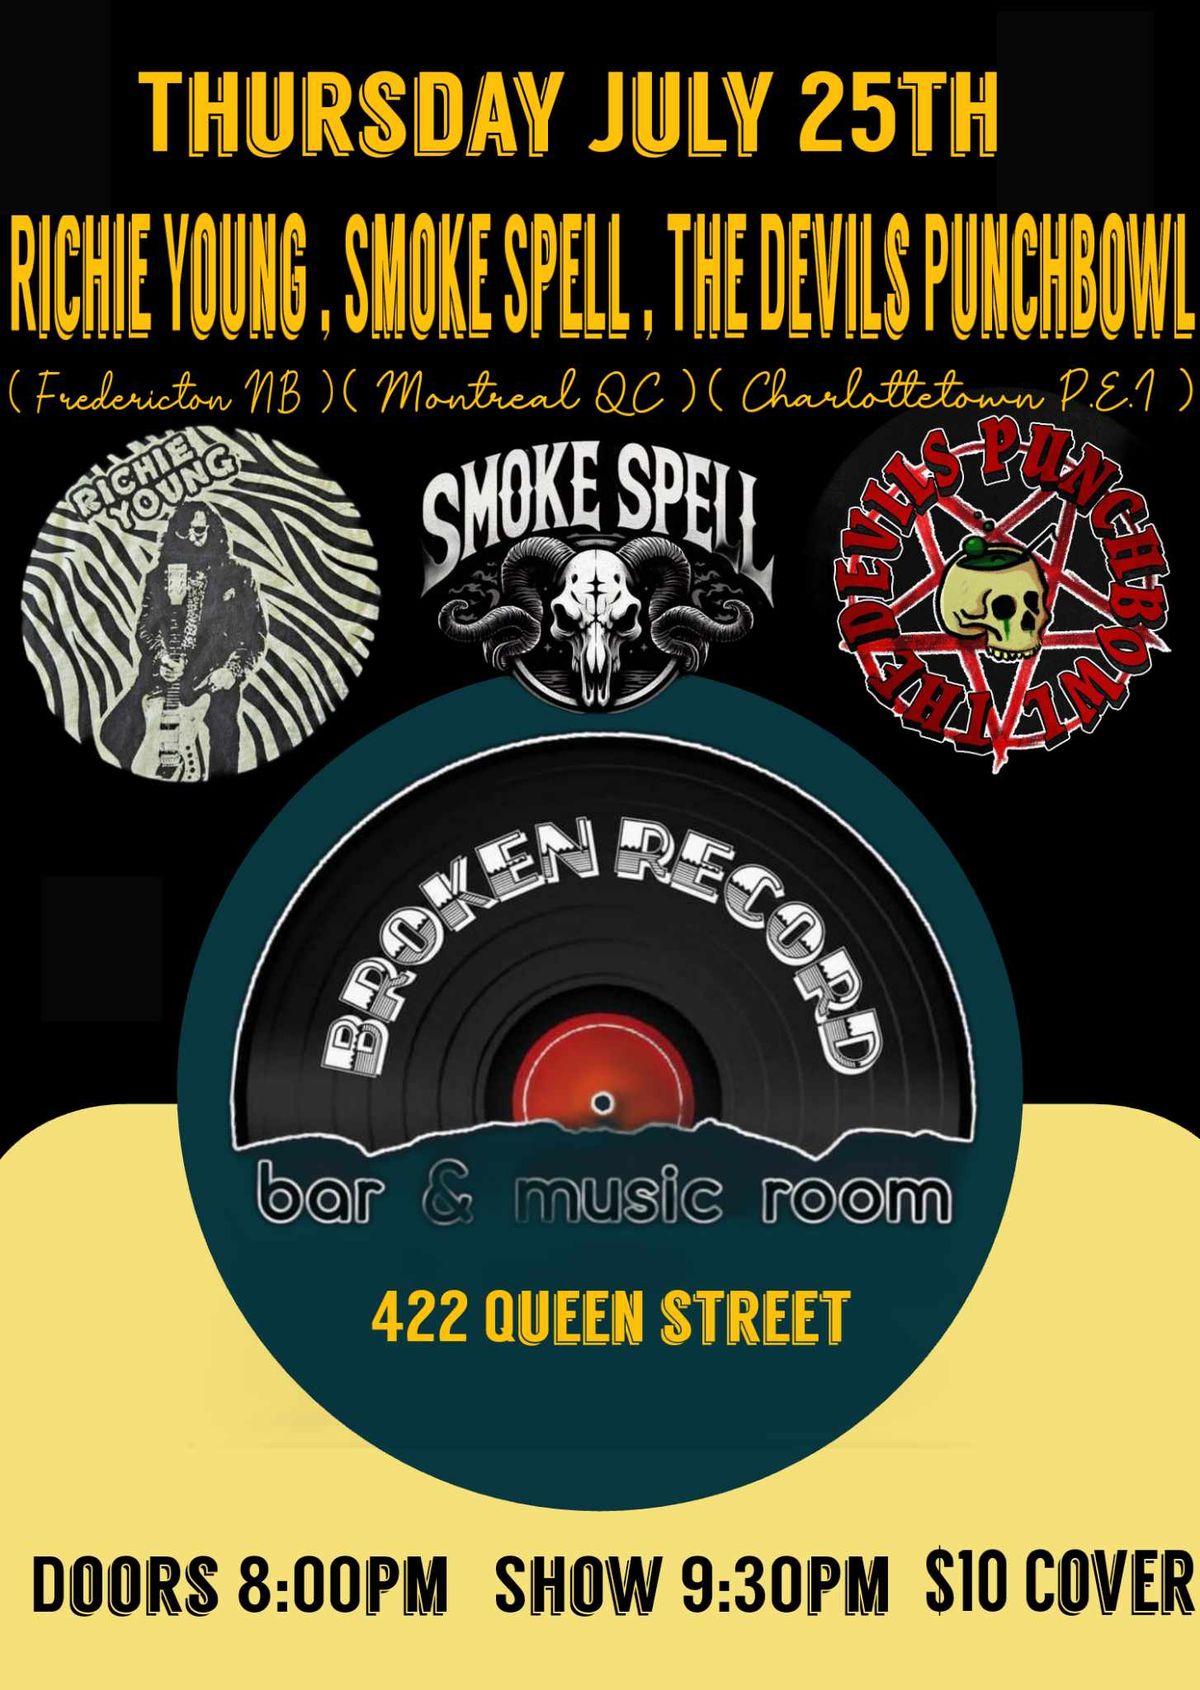 Richie Young, Smoke Spell, The Devils Punchbowl @ Broken Record Bar & Music Room